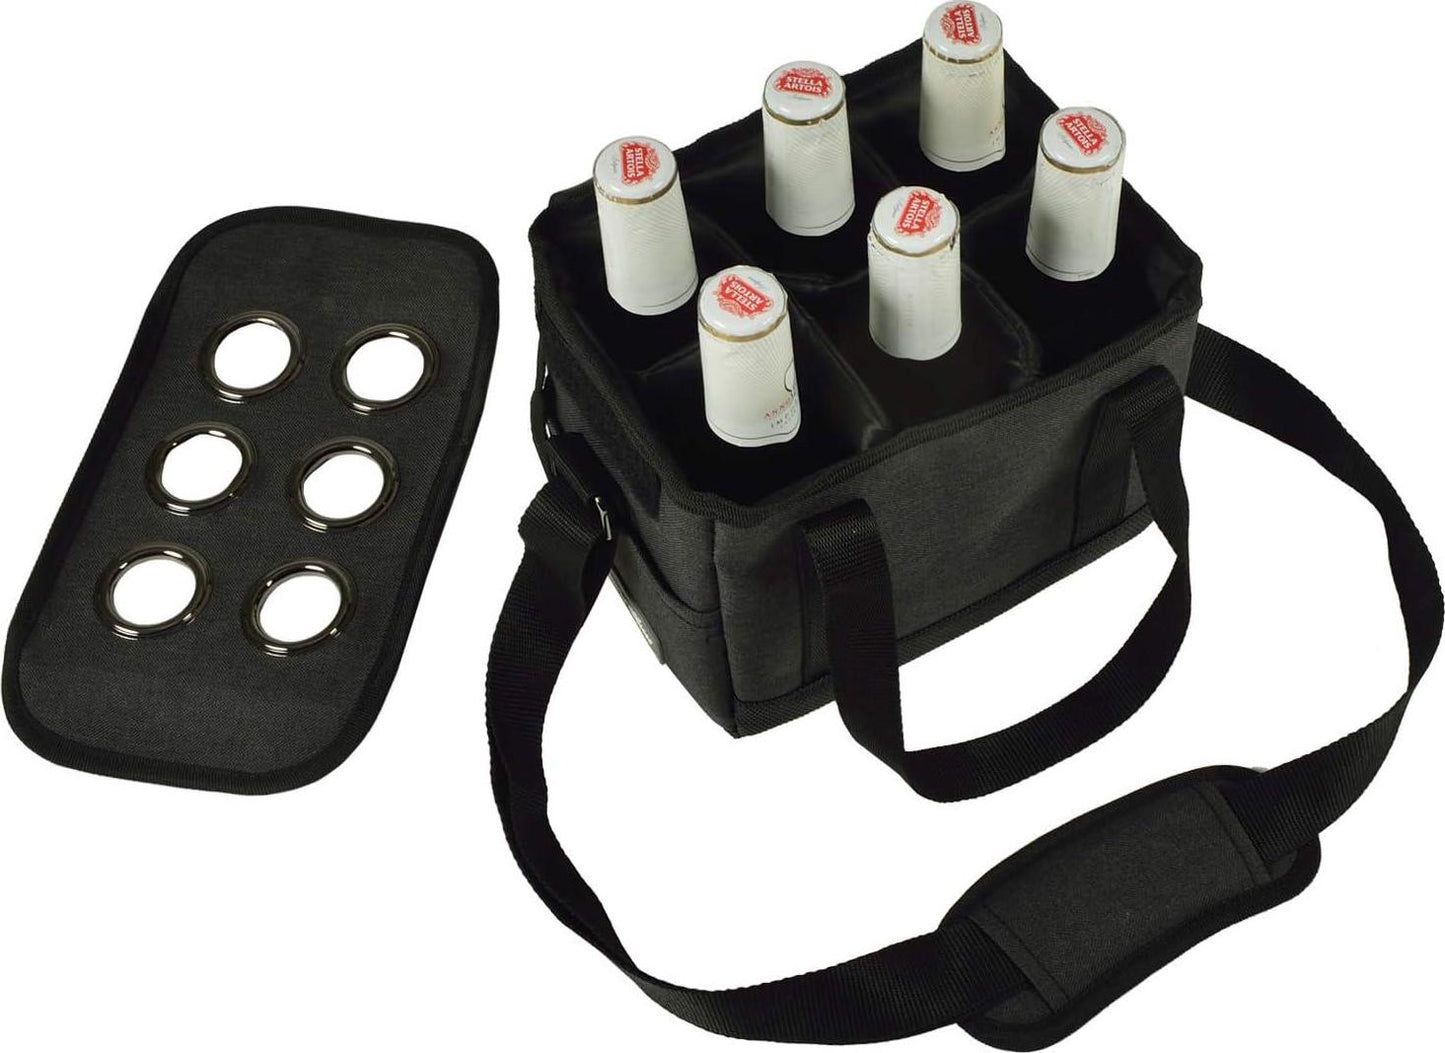 Picnic at Ascot Insulated Six Bottle Beer Caddy with Opener